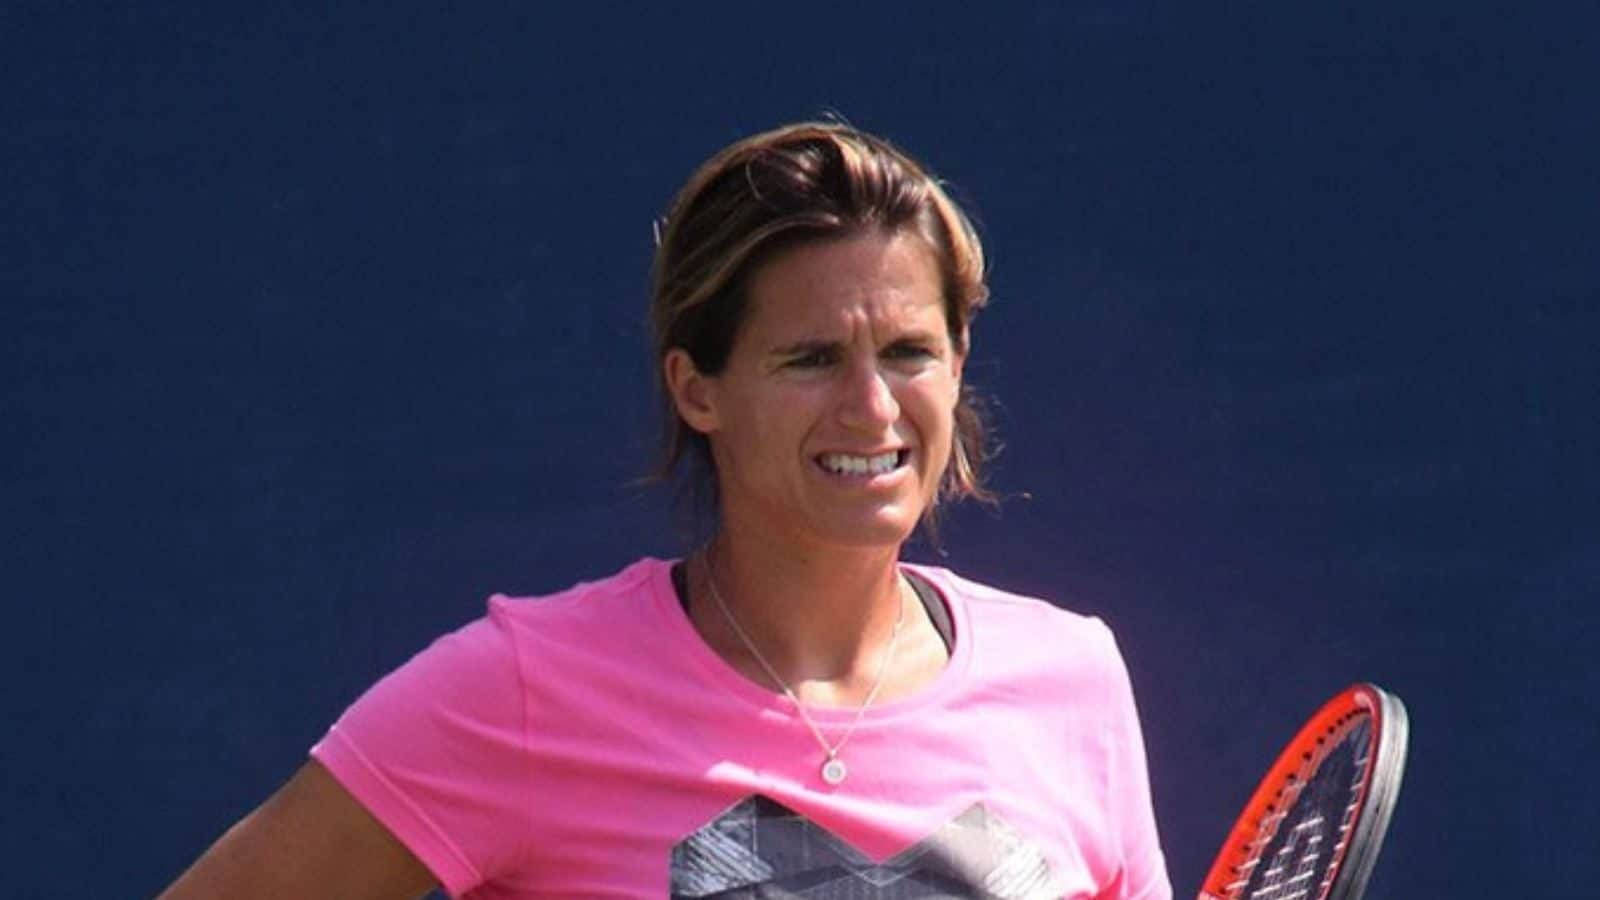 Amélie Mauresmo Looking At Opponent Wallpaper